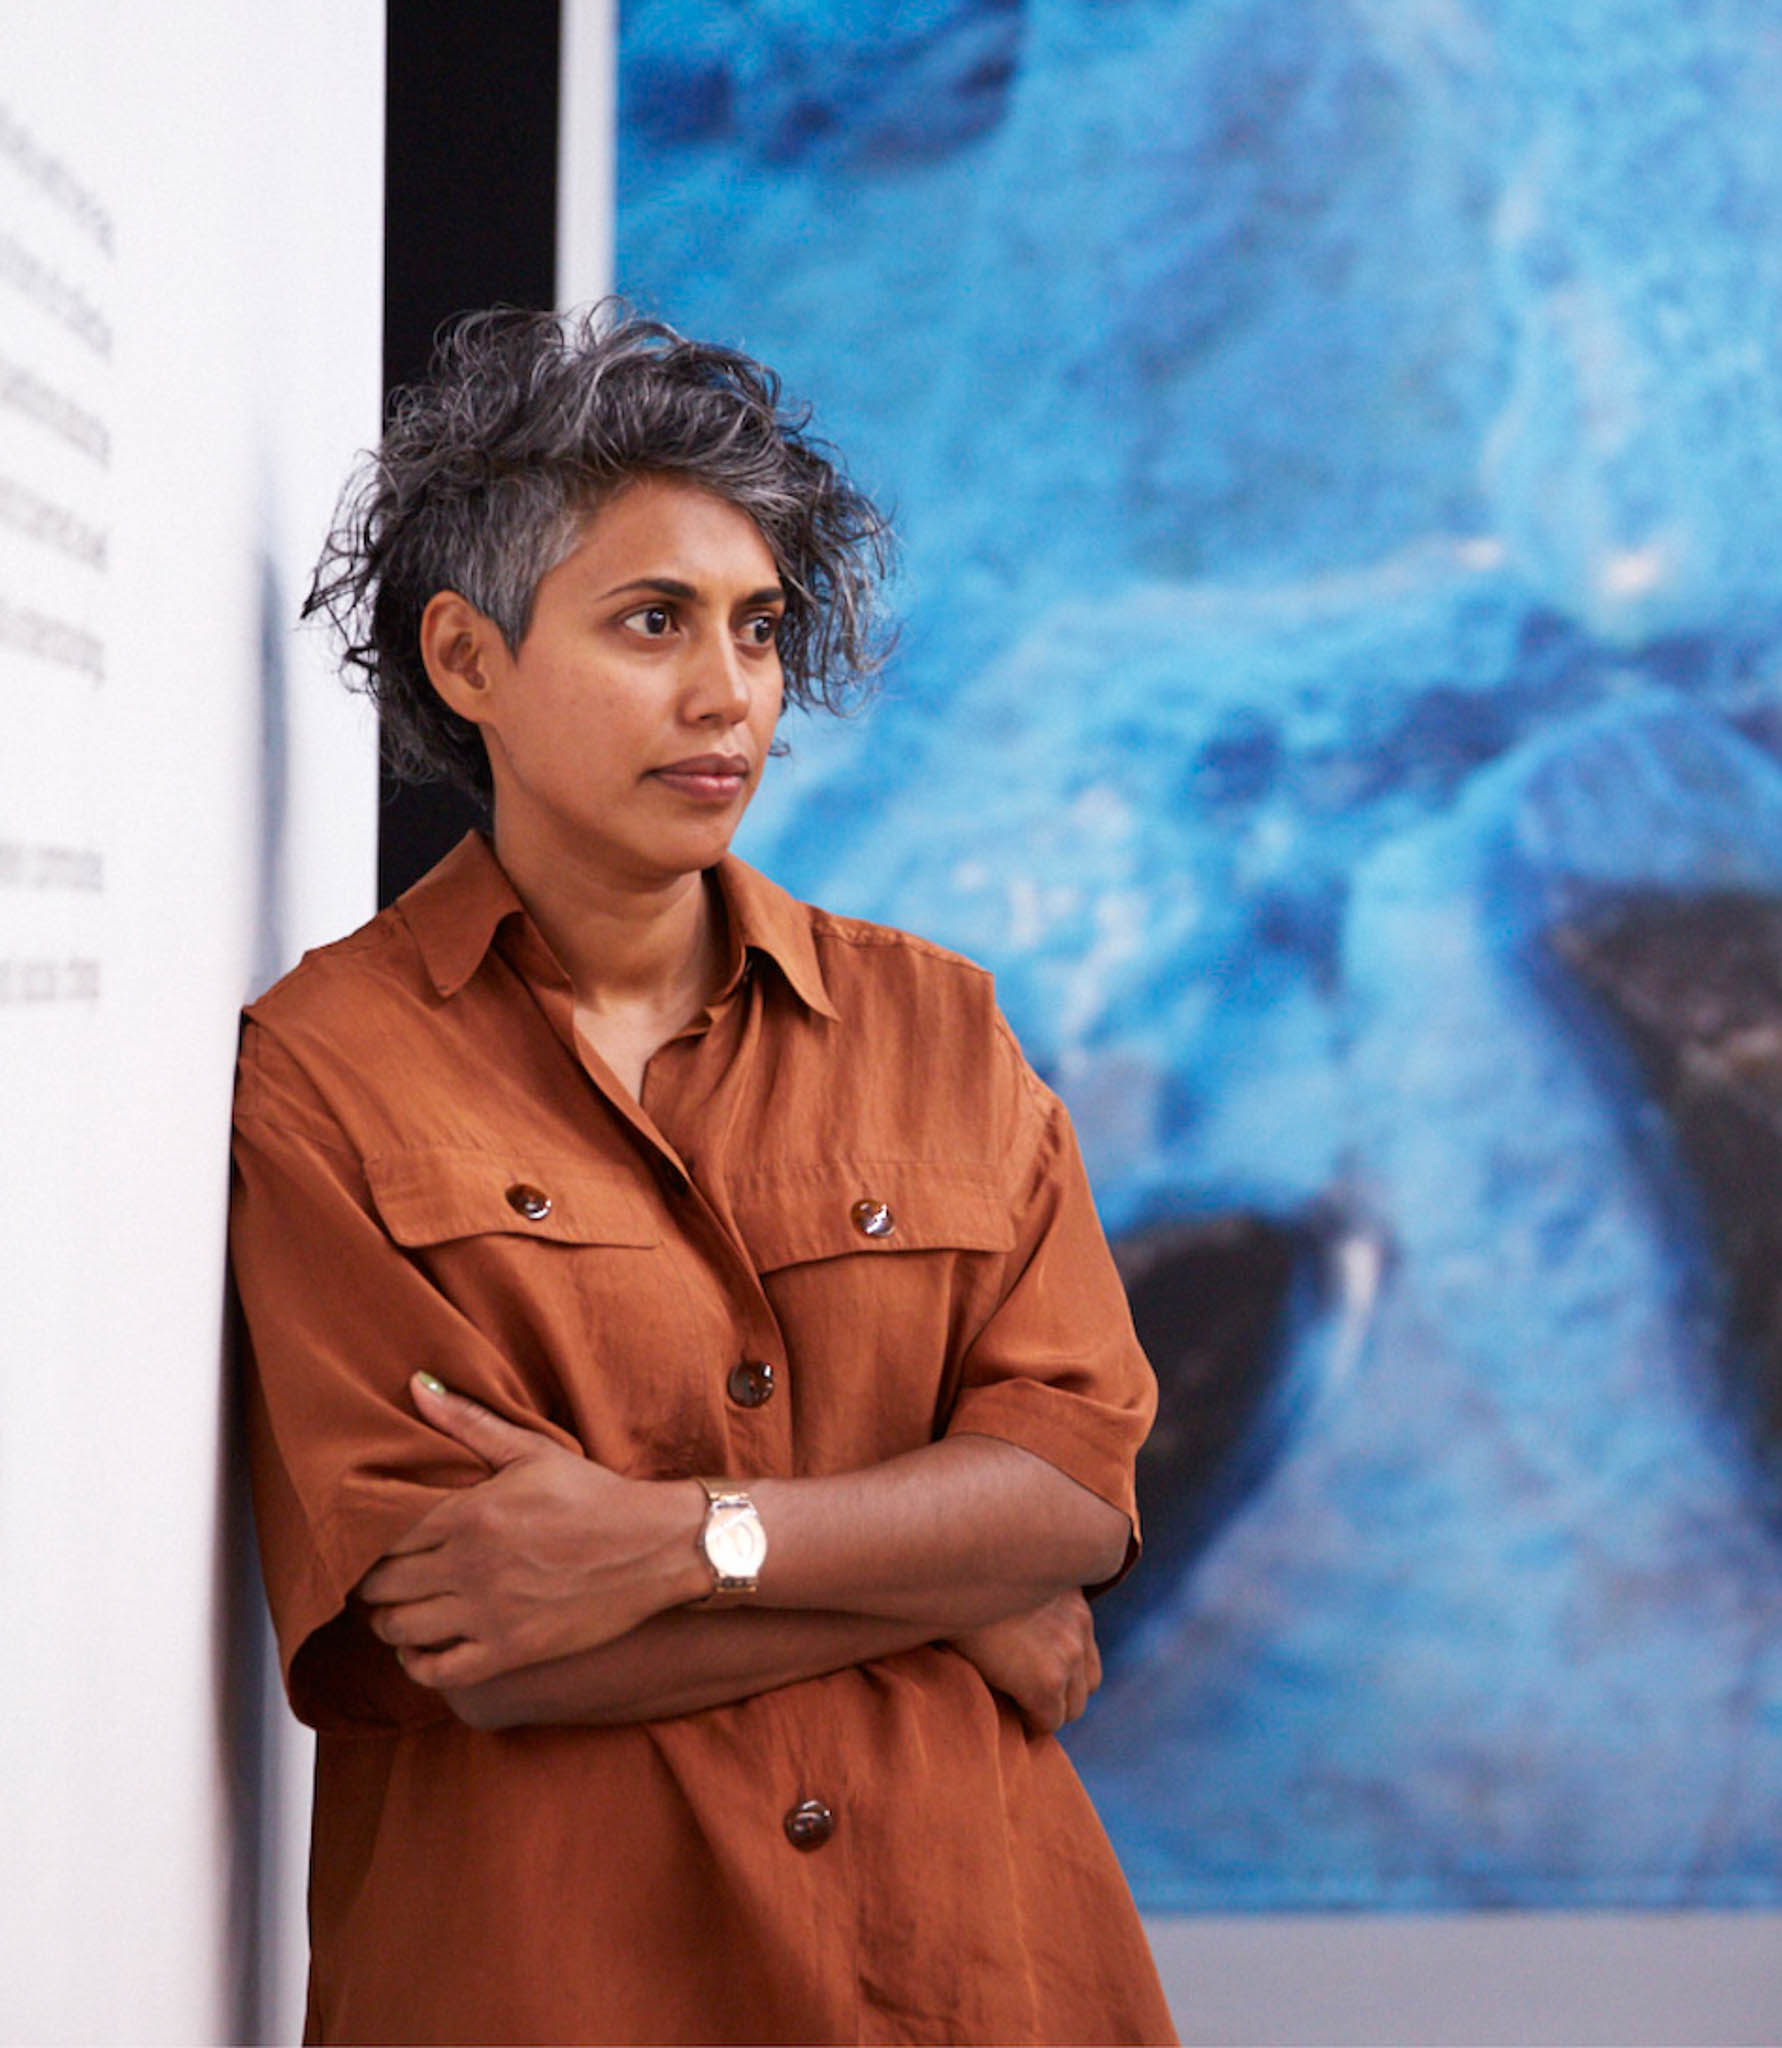 An artist stands against the wall with a large blue piece of art in the background.